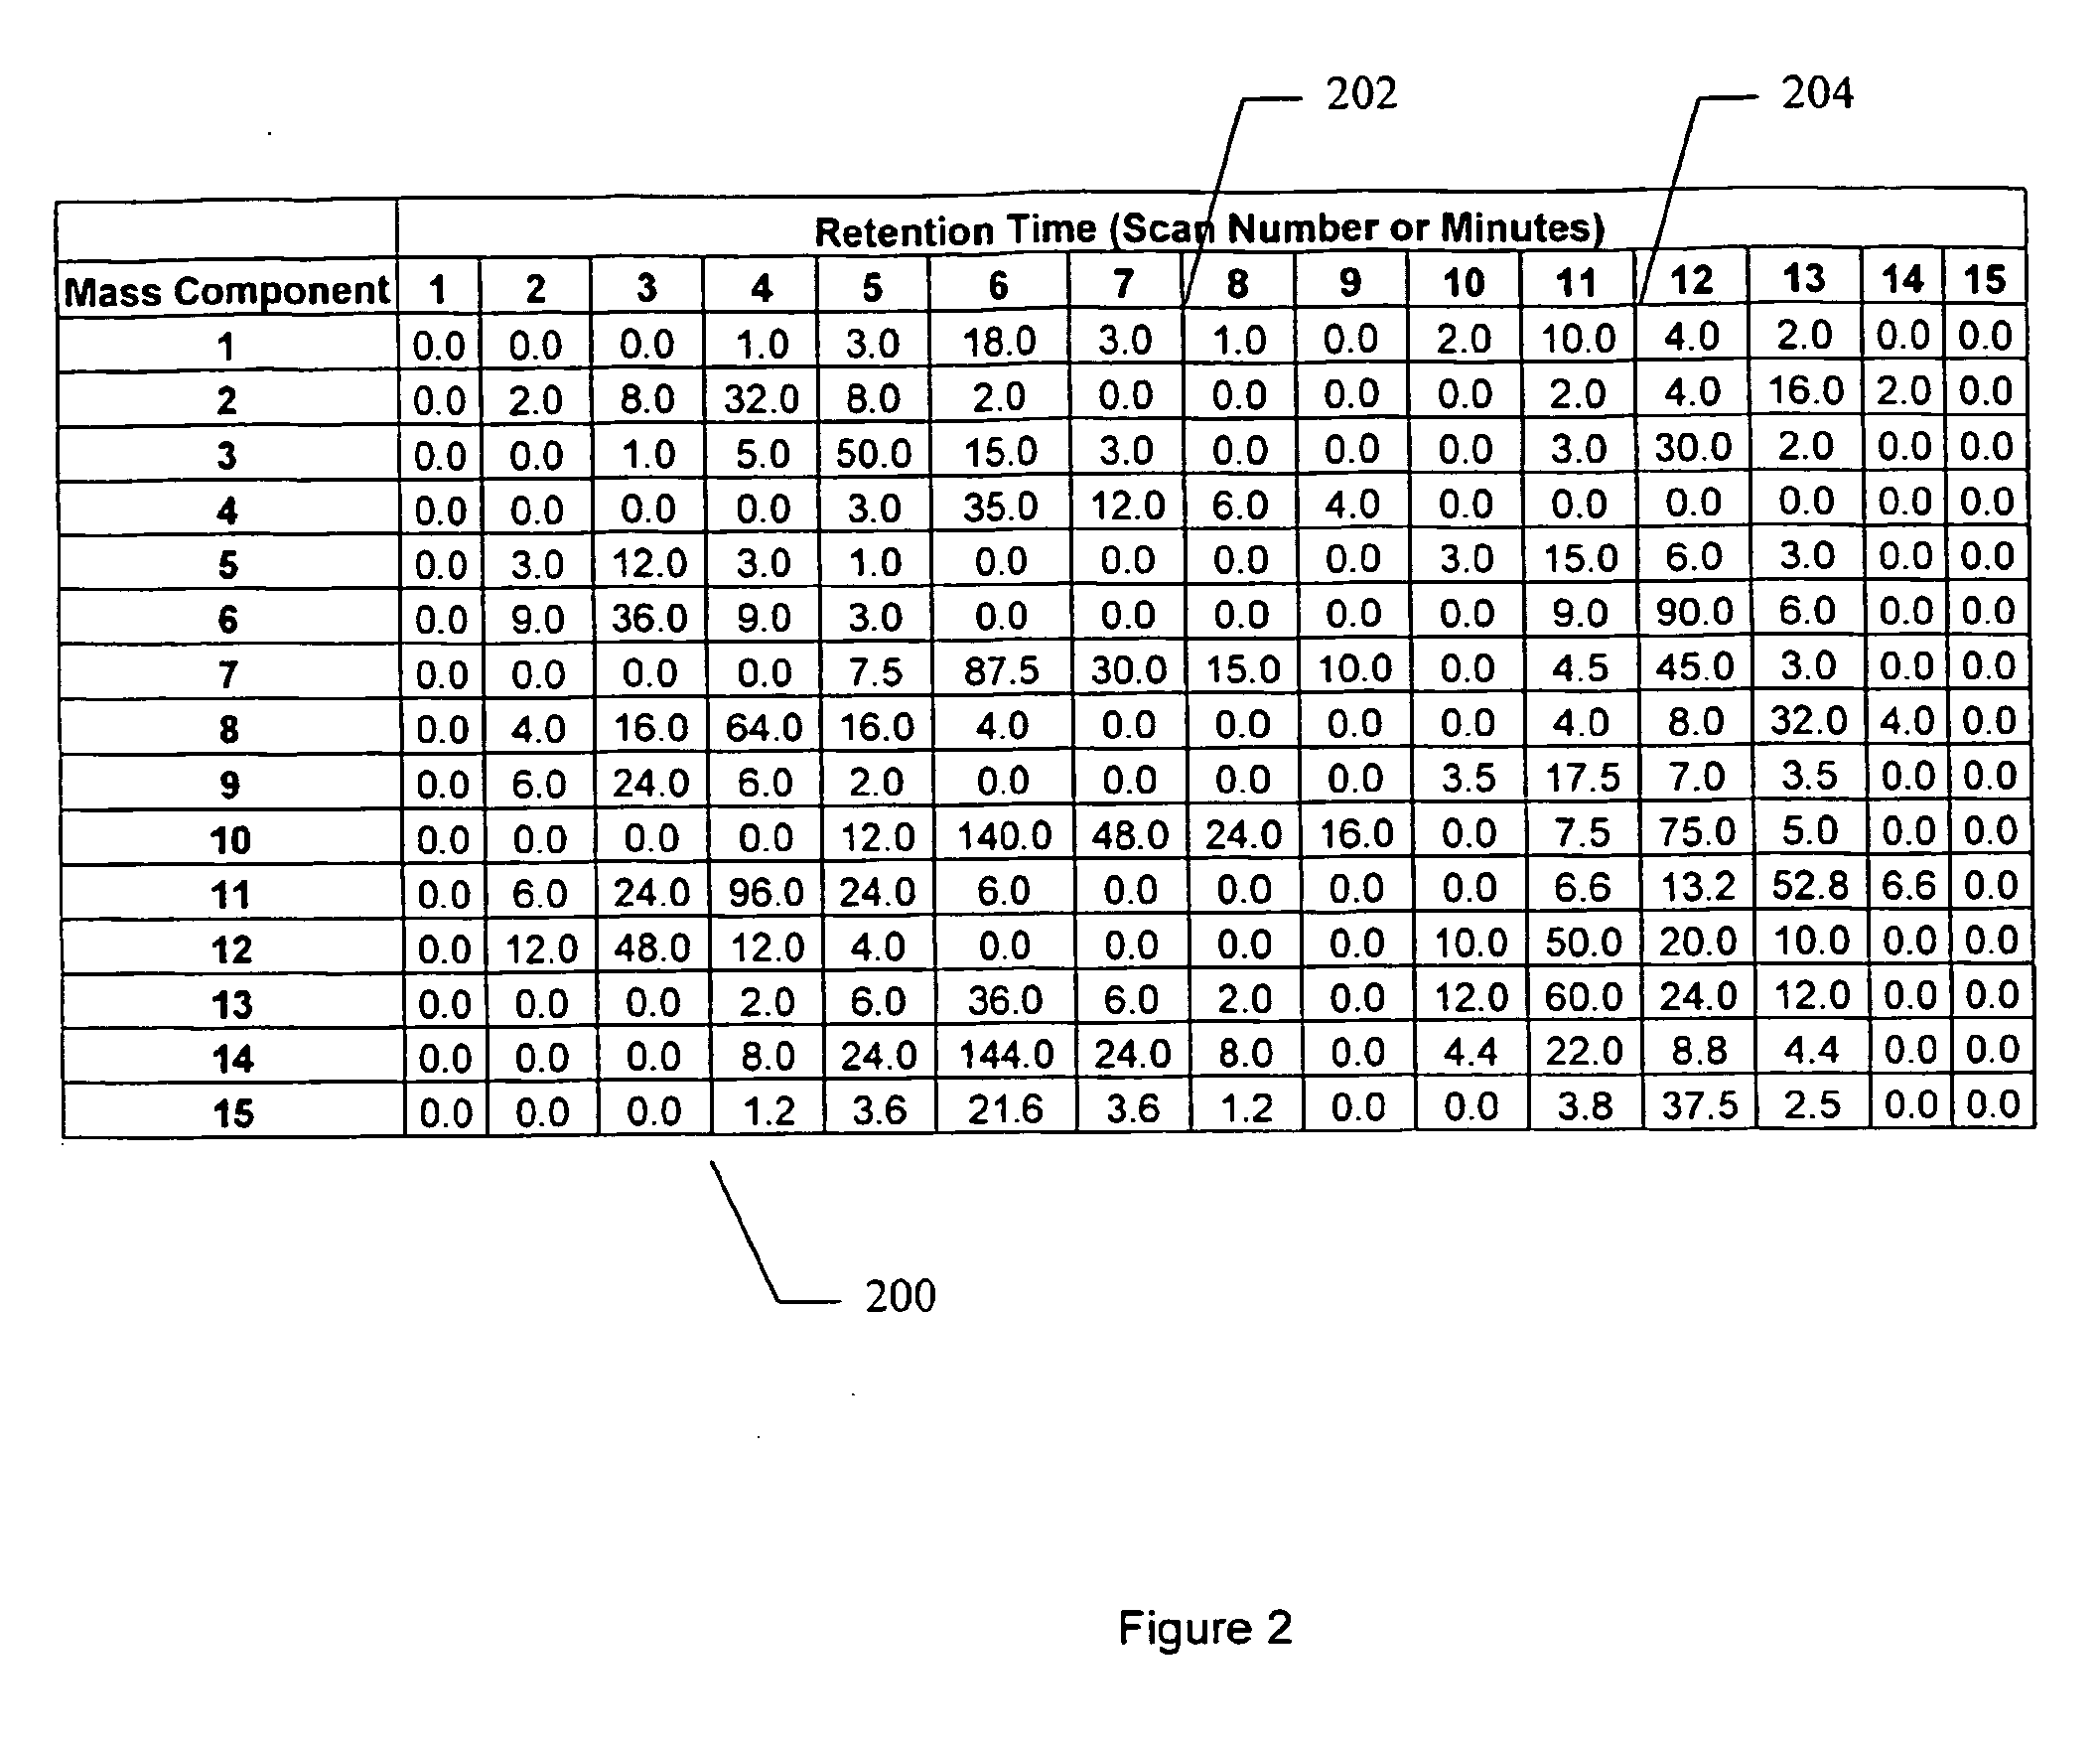 System and Method for Grouping Precursor and Fragment Ions Using Selected Ion Chromatograms